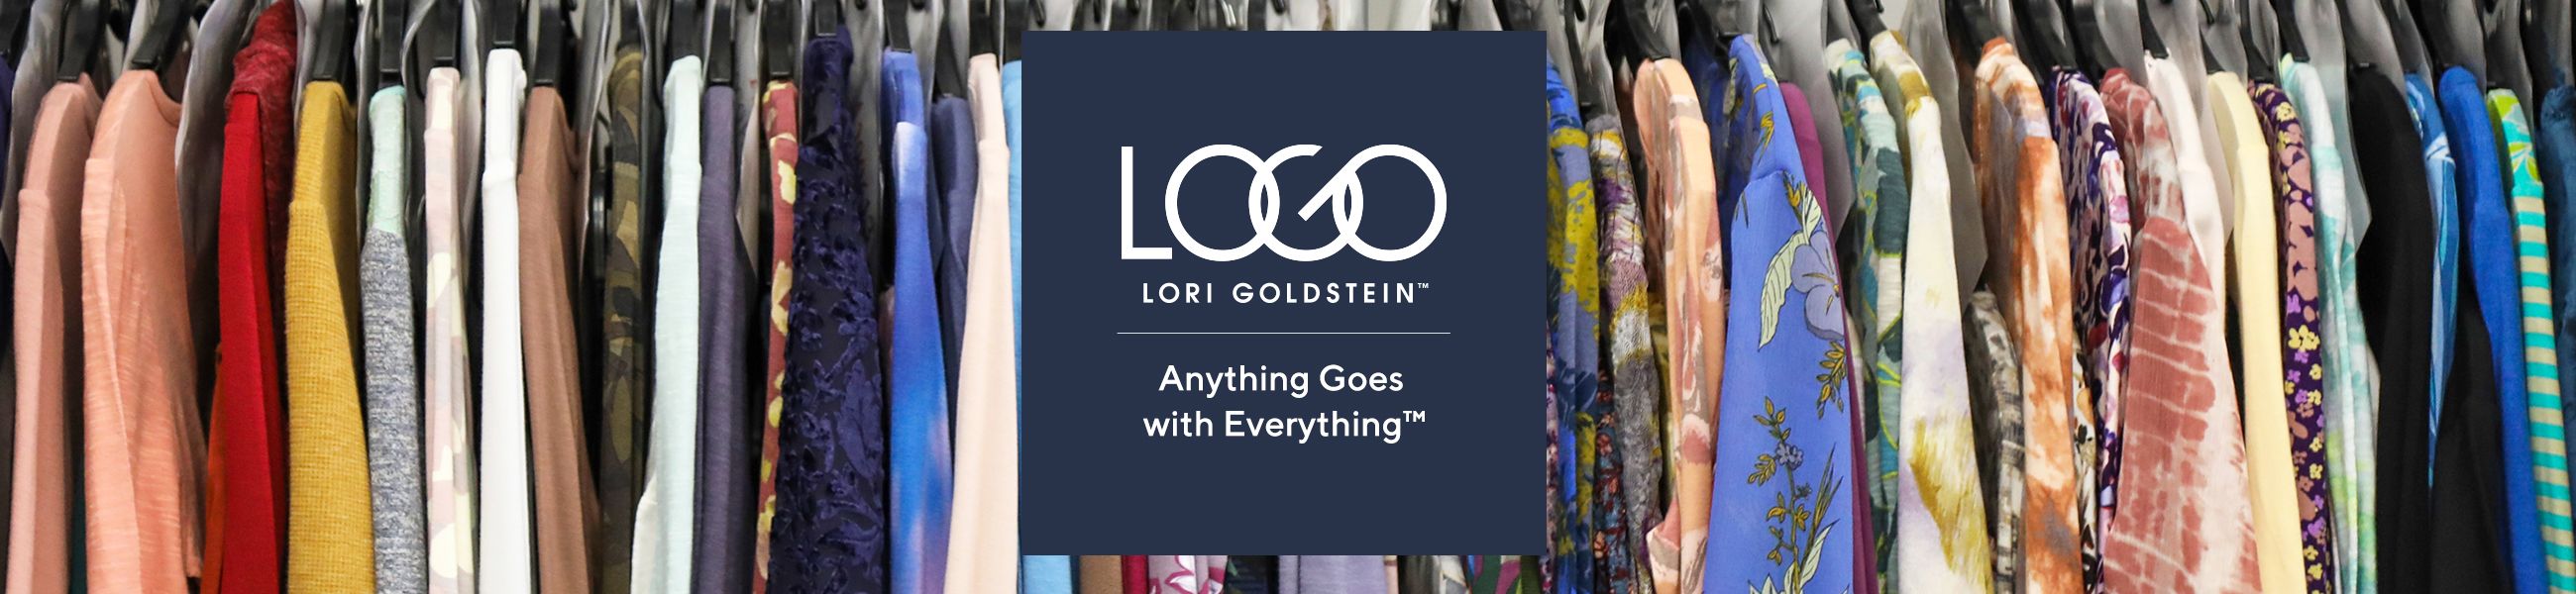 LOGO by Lori Goldstein - Anything Goes with Everything